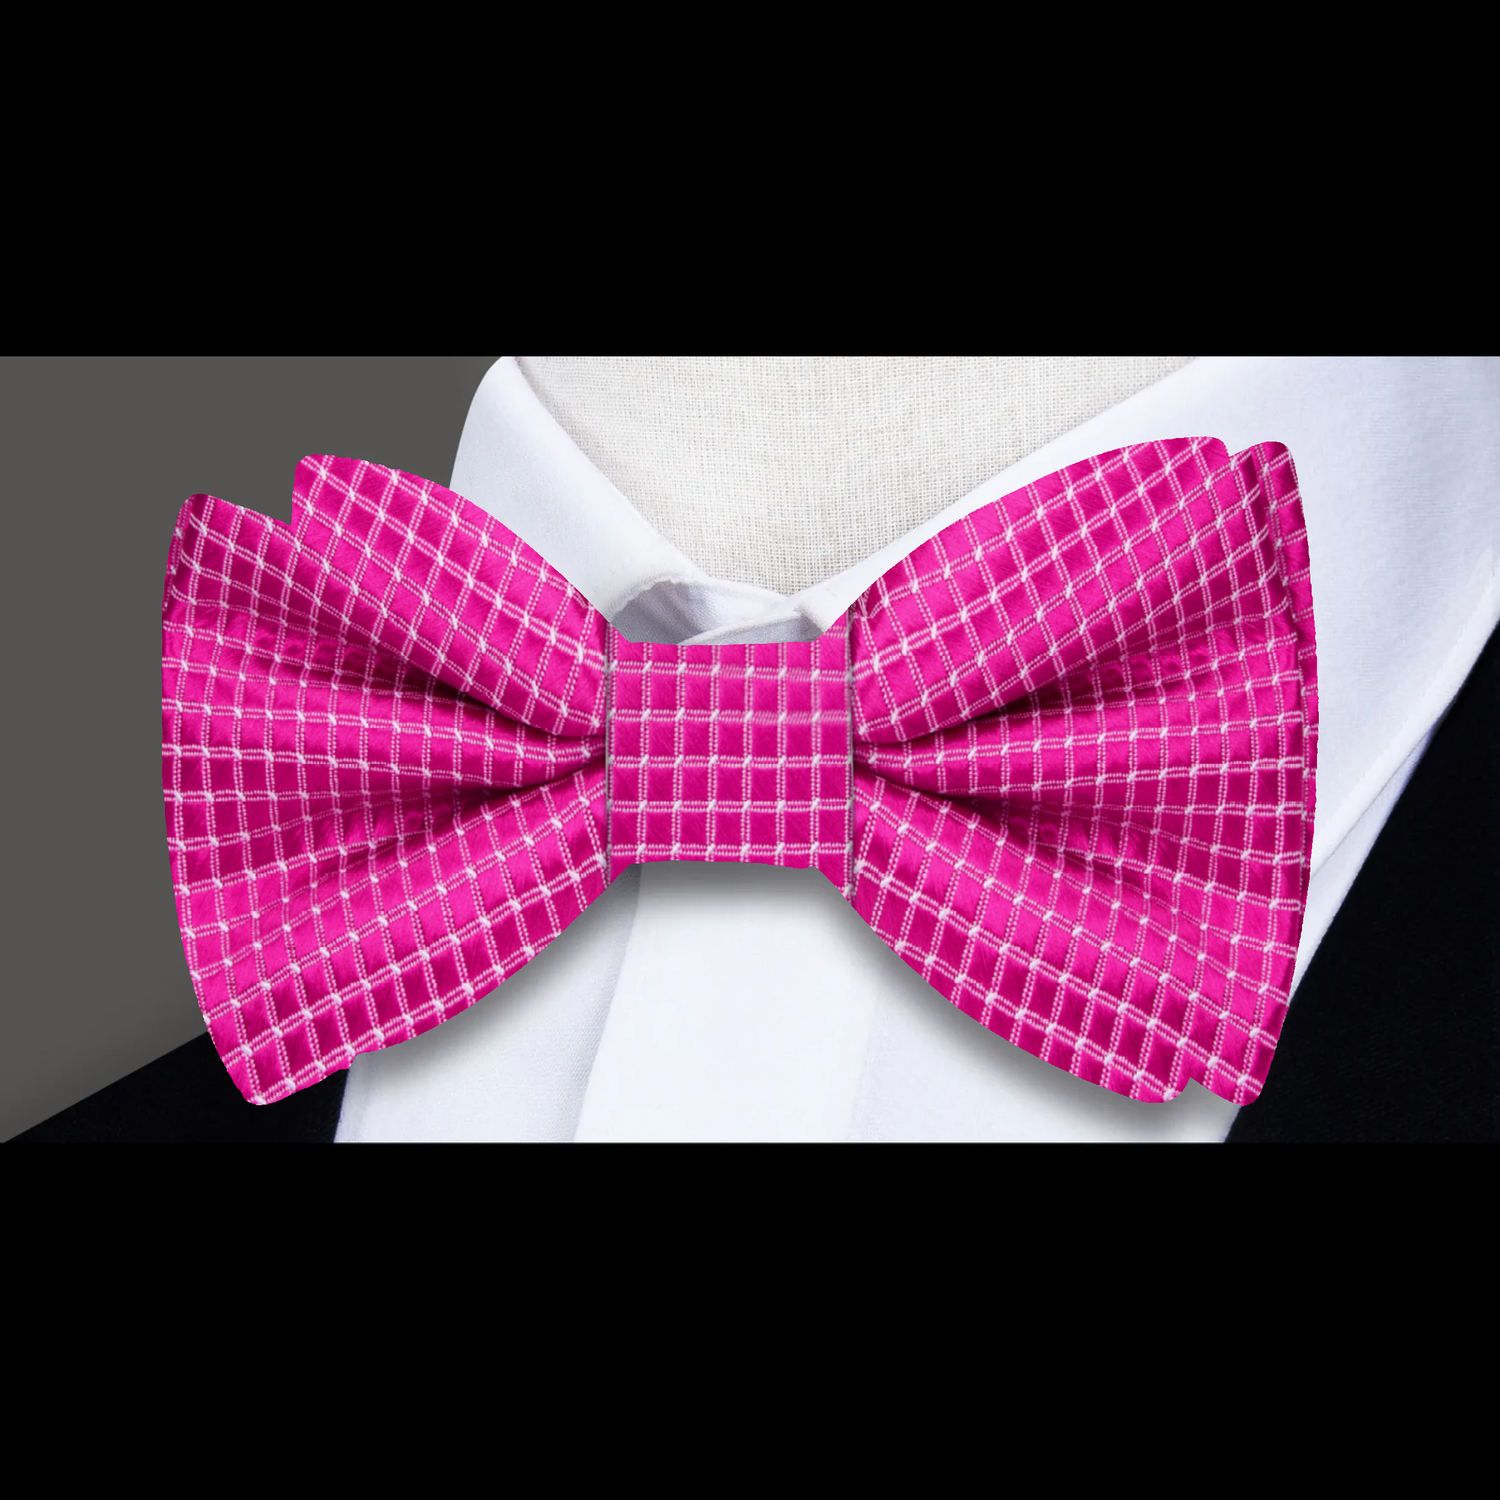 Pink with White Geometric Texture Bow Tie